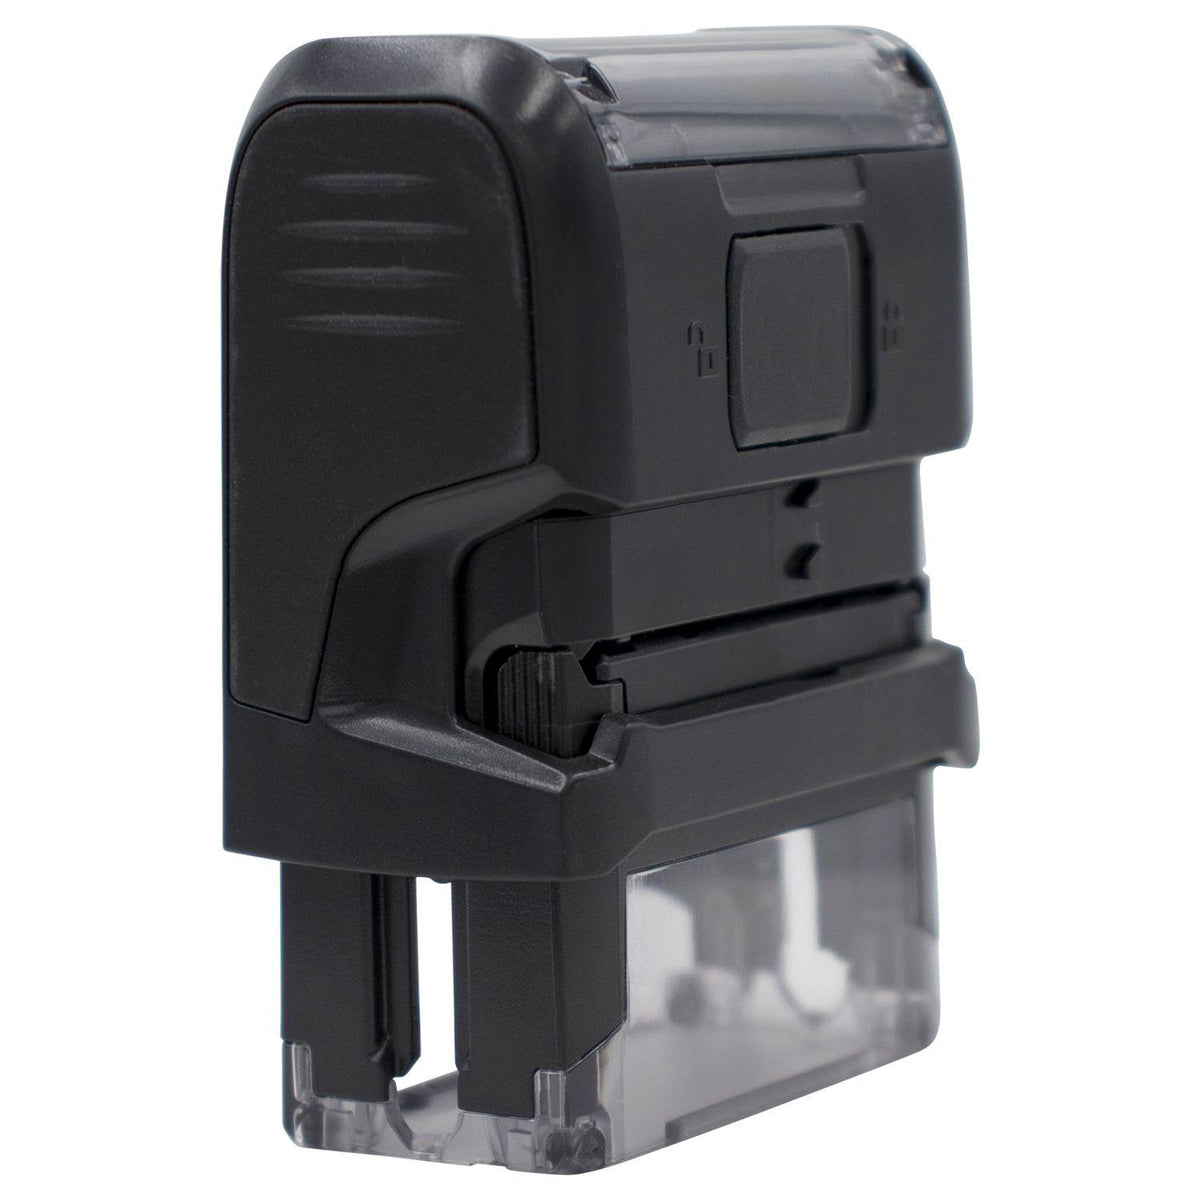 Self-Inking Temporarily Away Stamp - Engineer Seal Stamps - Brand_Trodat, Impression Size_Small, Stamp Type_Self-Inking Stamp, Type of Use_Postal &amp; Mailing, Type of Use_Shipping &amp; Receiving